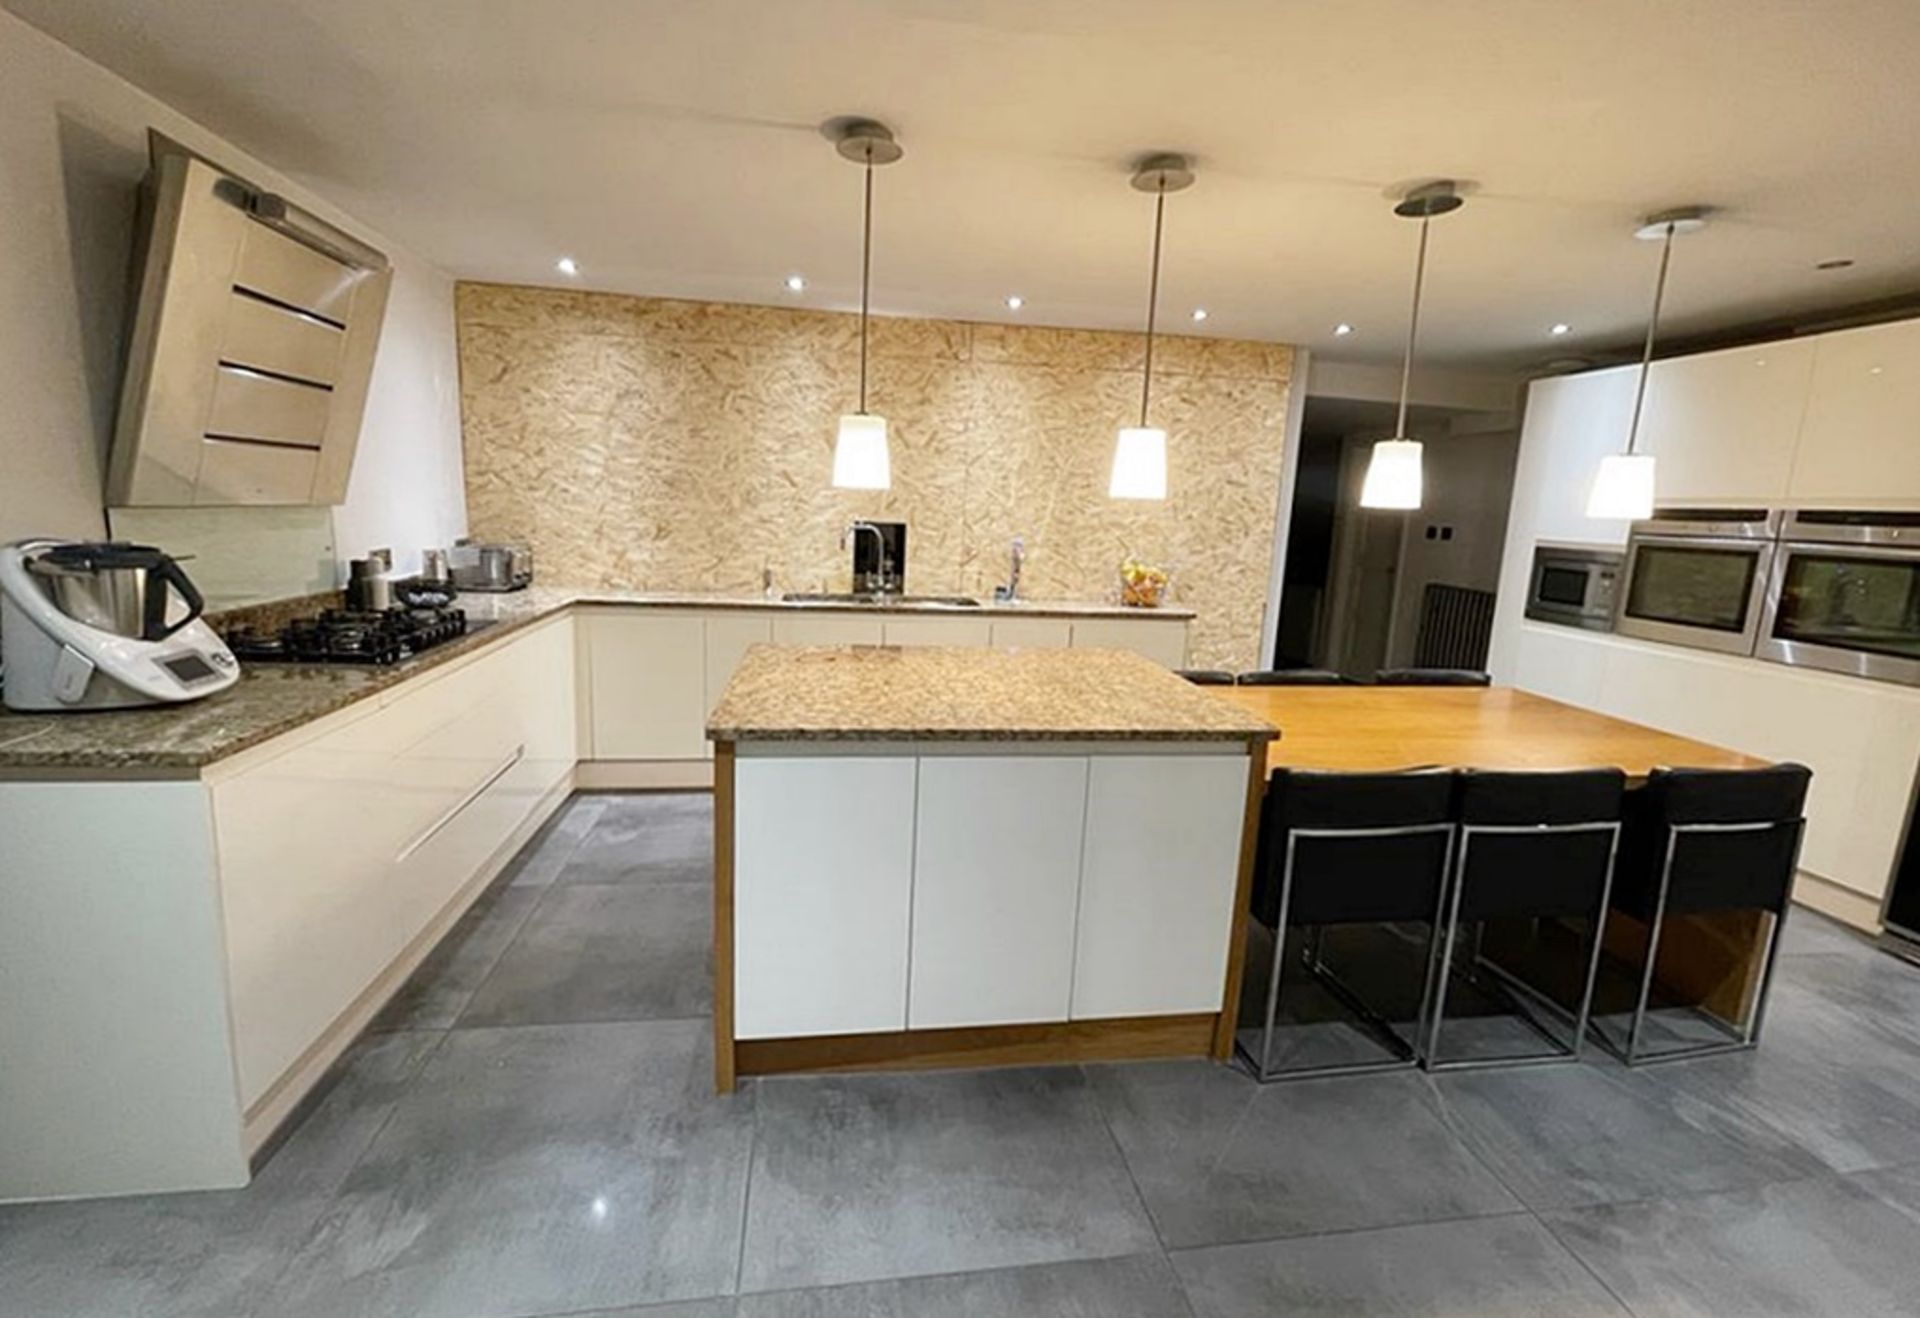 1 x Stunning PARAPAN Handleless Fitted Kitchen with Neff Appliances, Granite Worktops & Island - Image 5 of 126